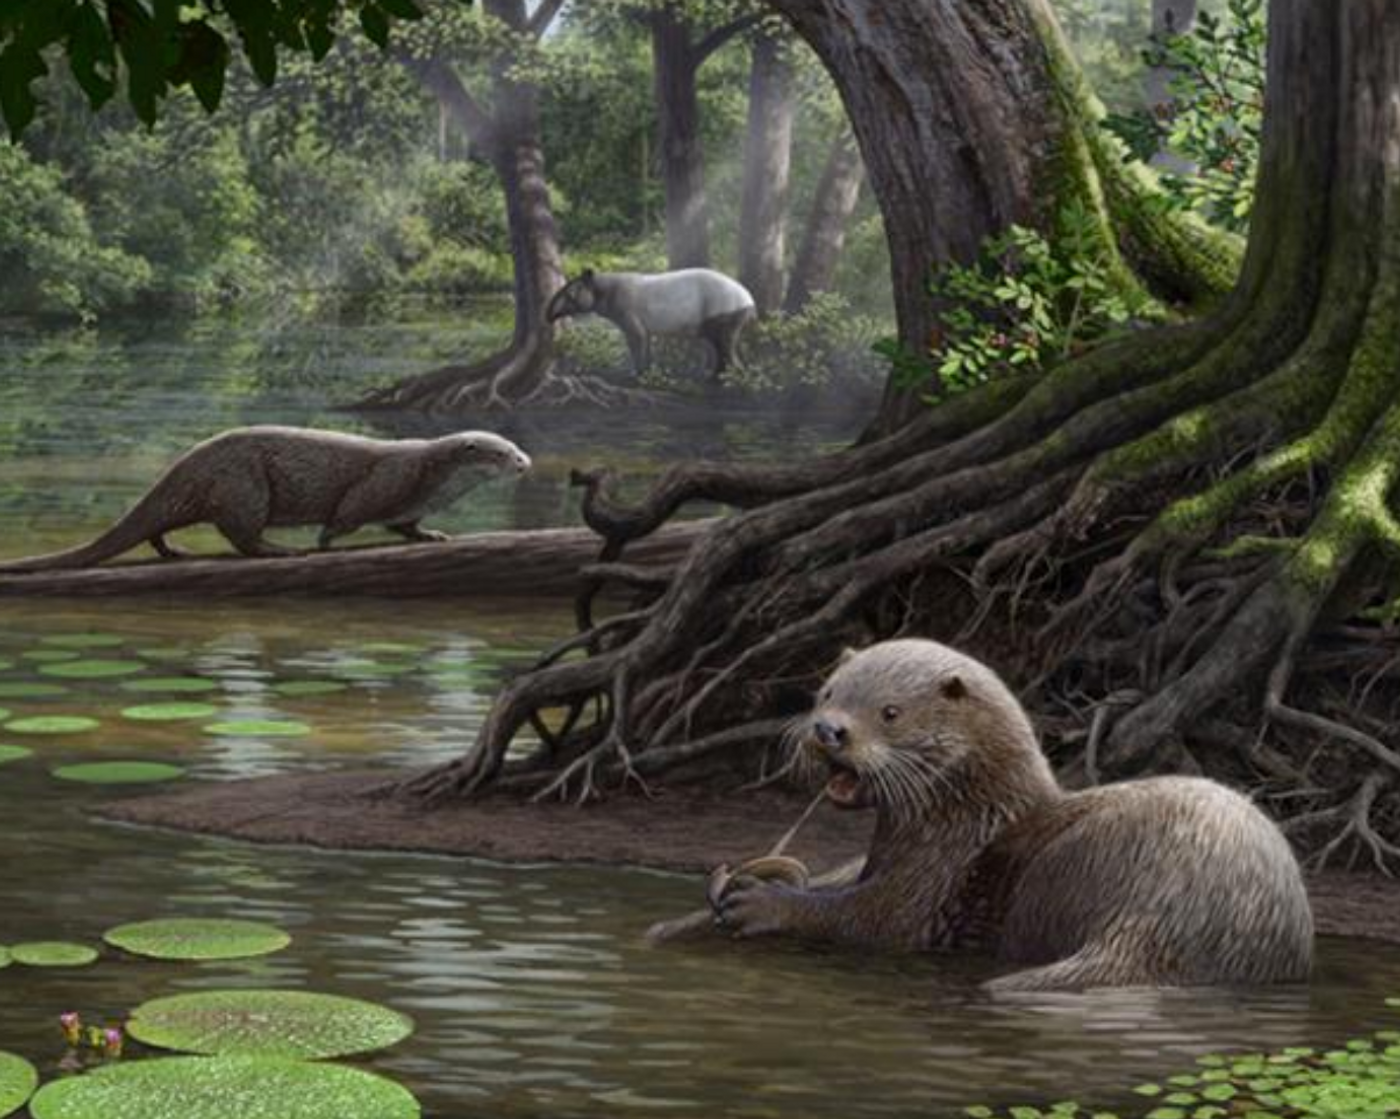 An artist's impression of the massive new otter species in its natural habitat, 6.1 million years ago.